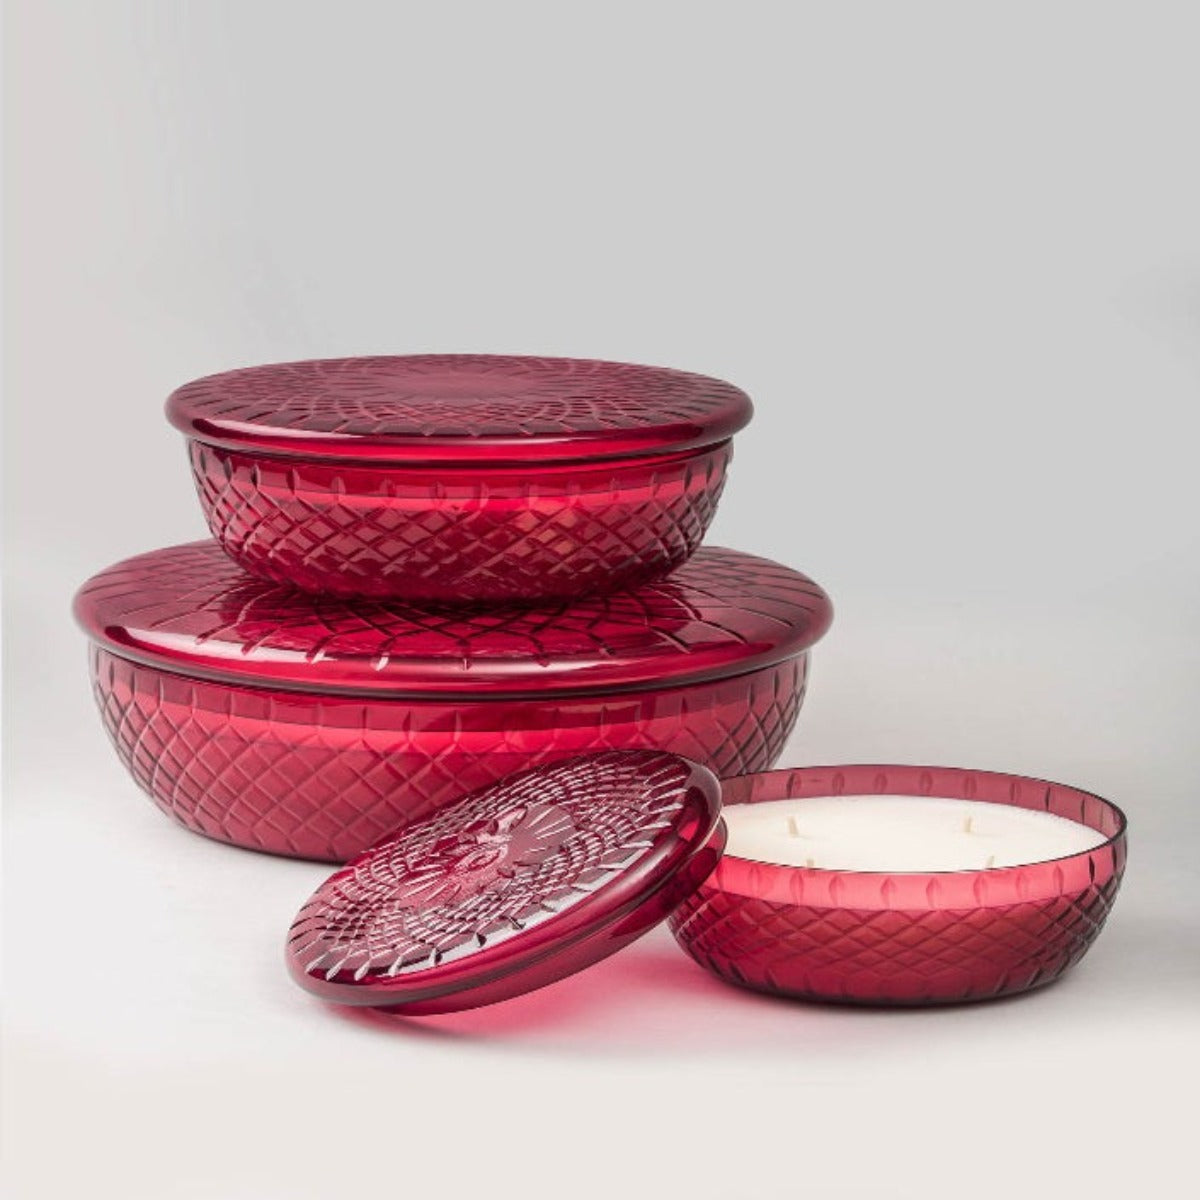 Royal Lid Bowl | Ruby | Scented Candle